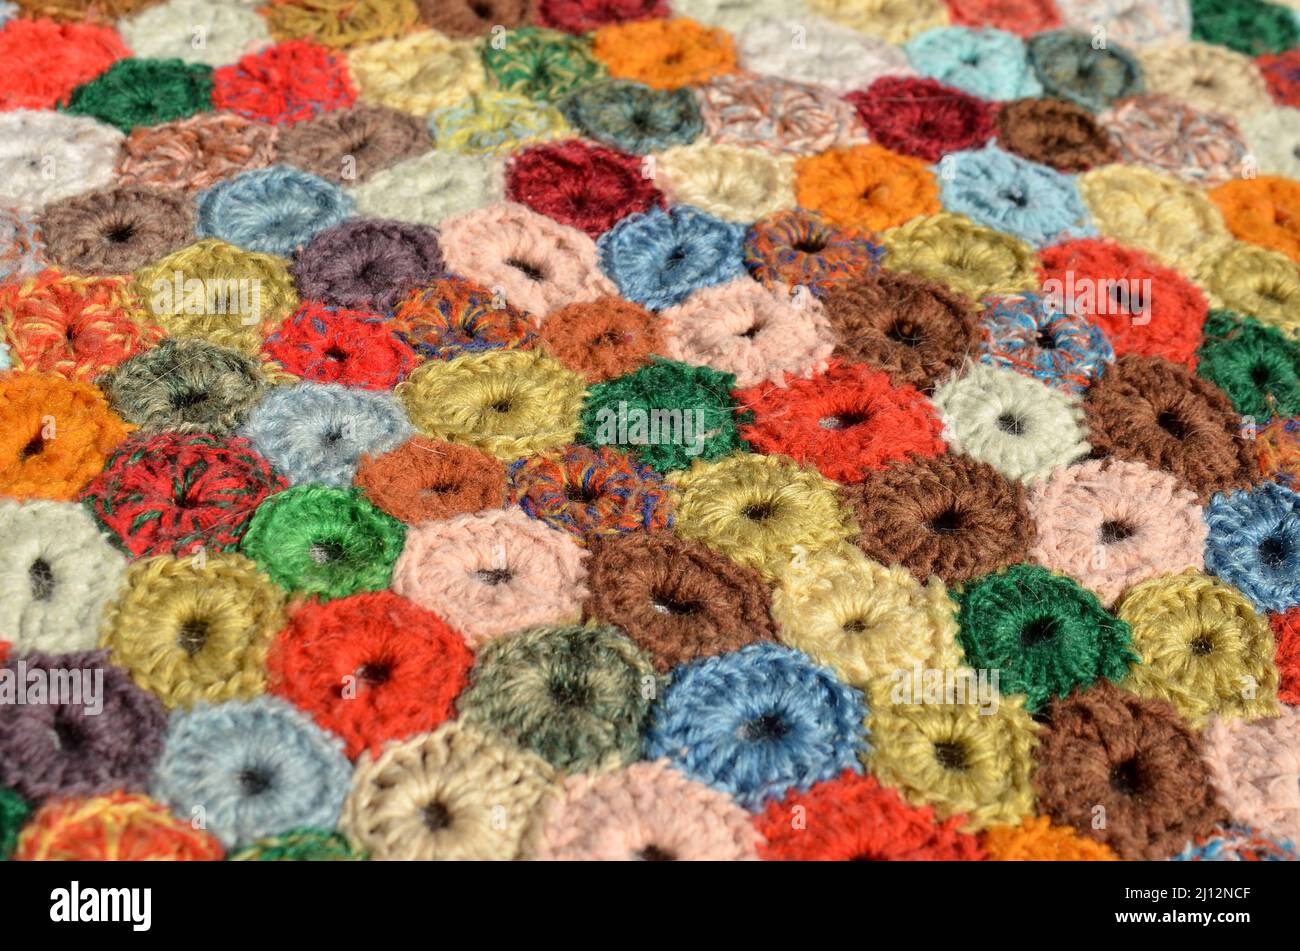 Closeup on a crocheted patchwork rug. Stock Photo